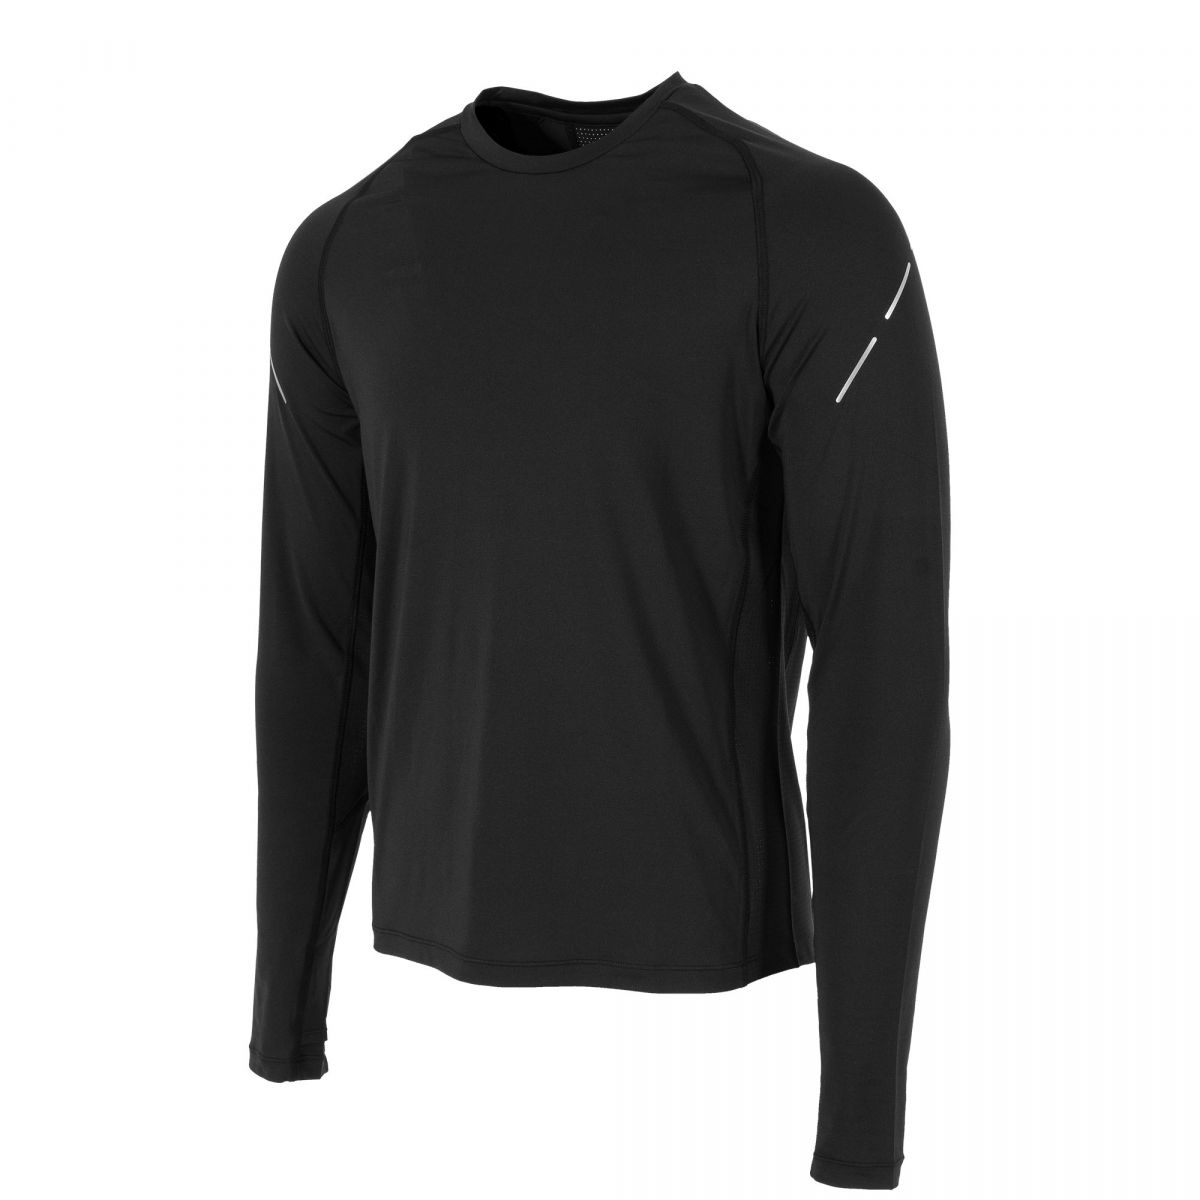 Stanno Functionals Long Sleeve Shirt Unisex